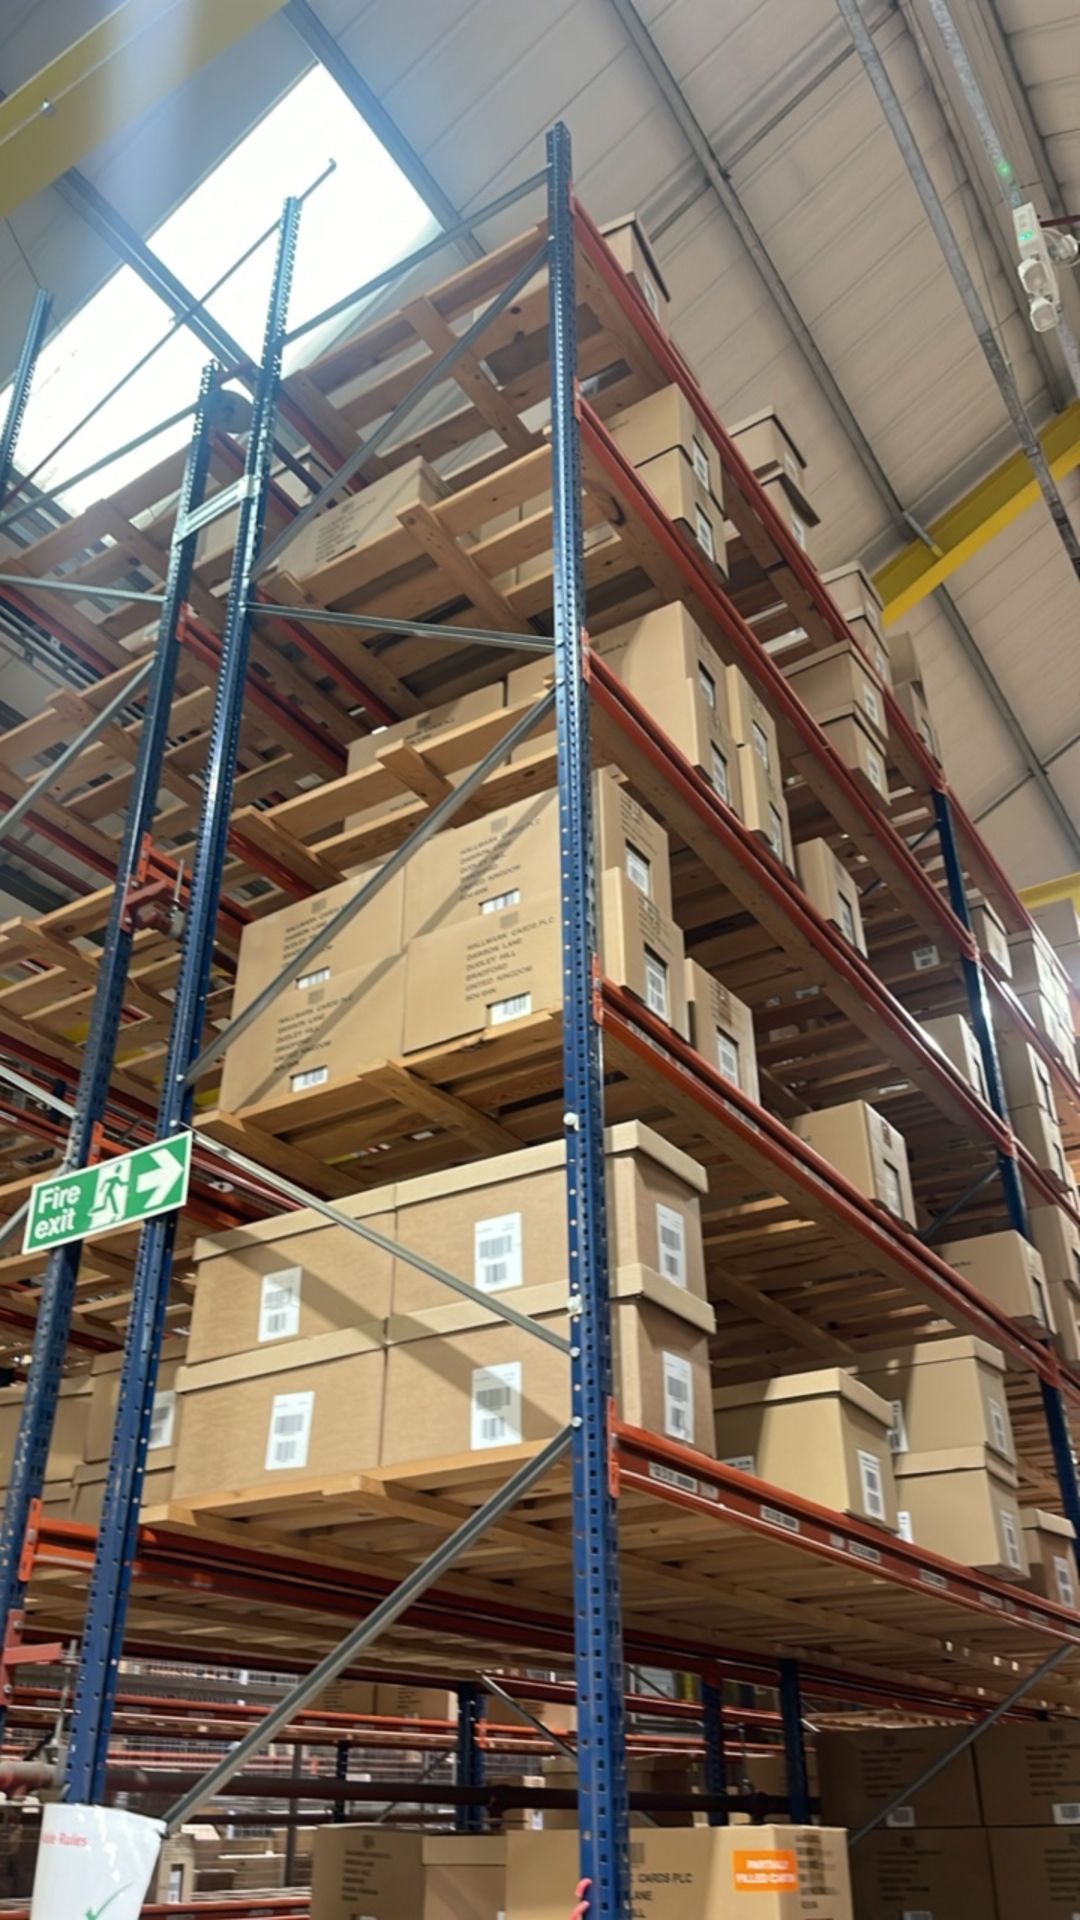 Run Of 24 Bays Of Back To Back Boltless Industrial Pallet Racking - Image 4 of 11